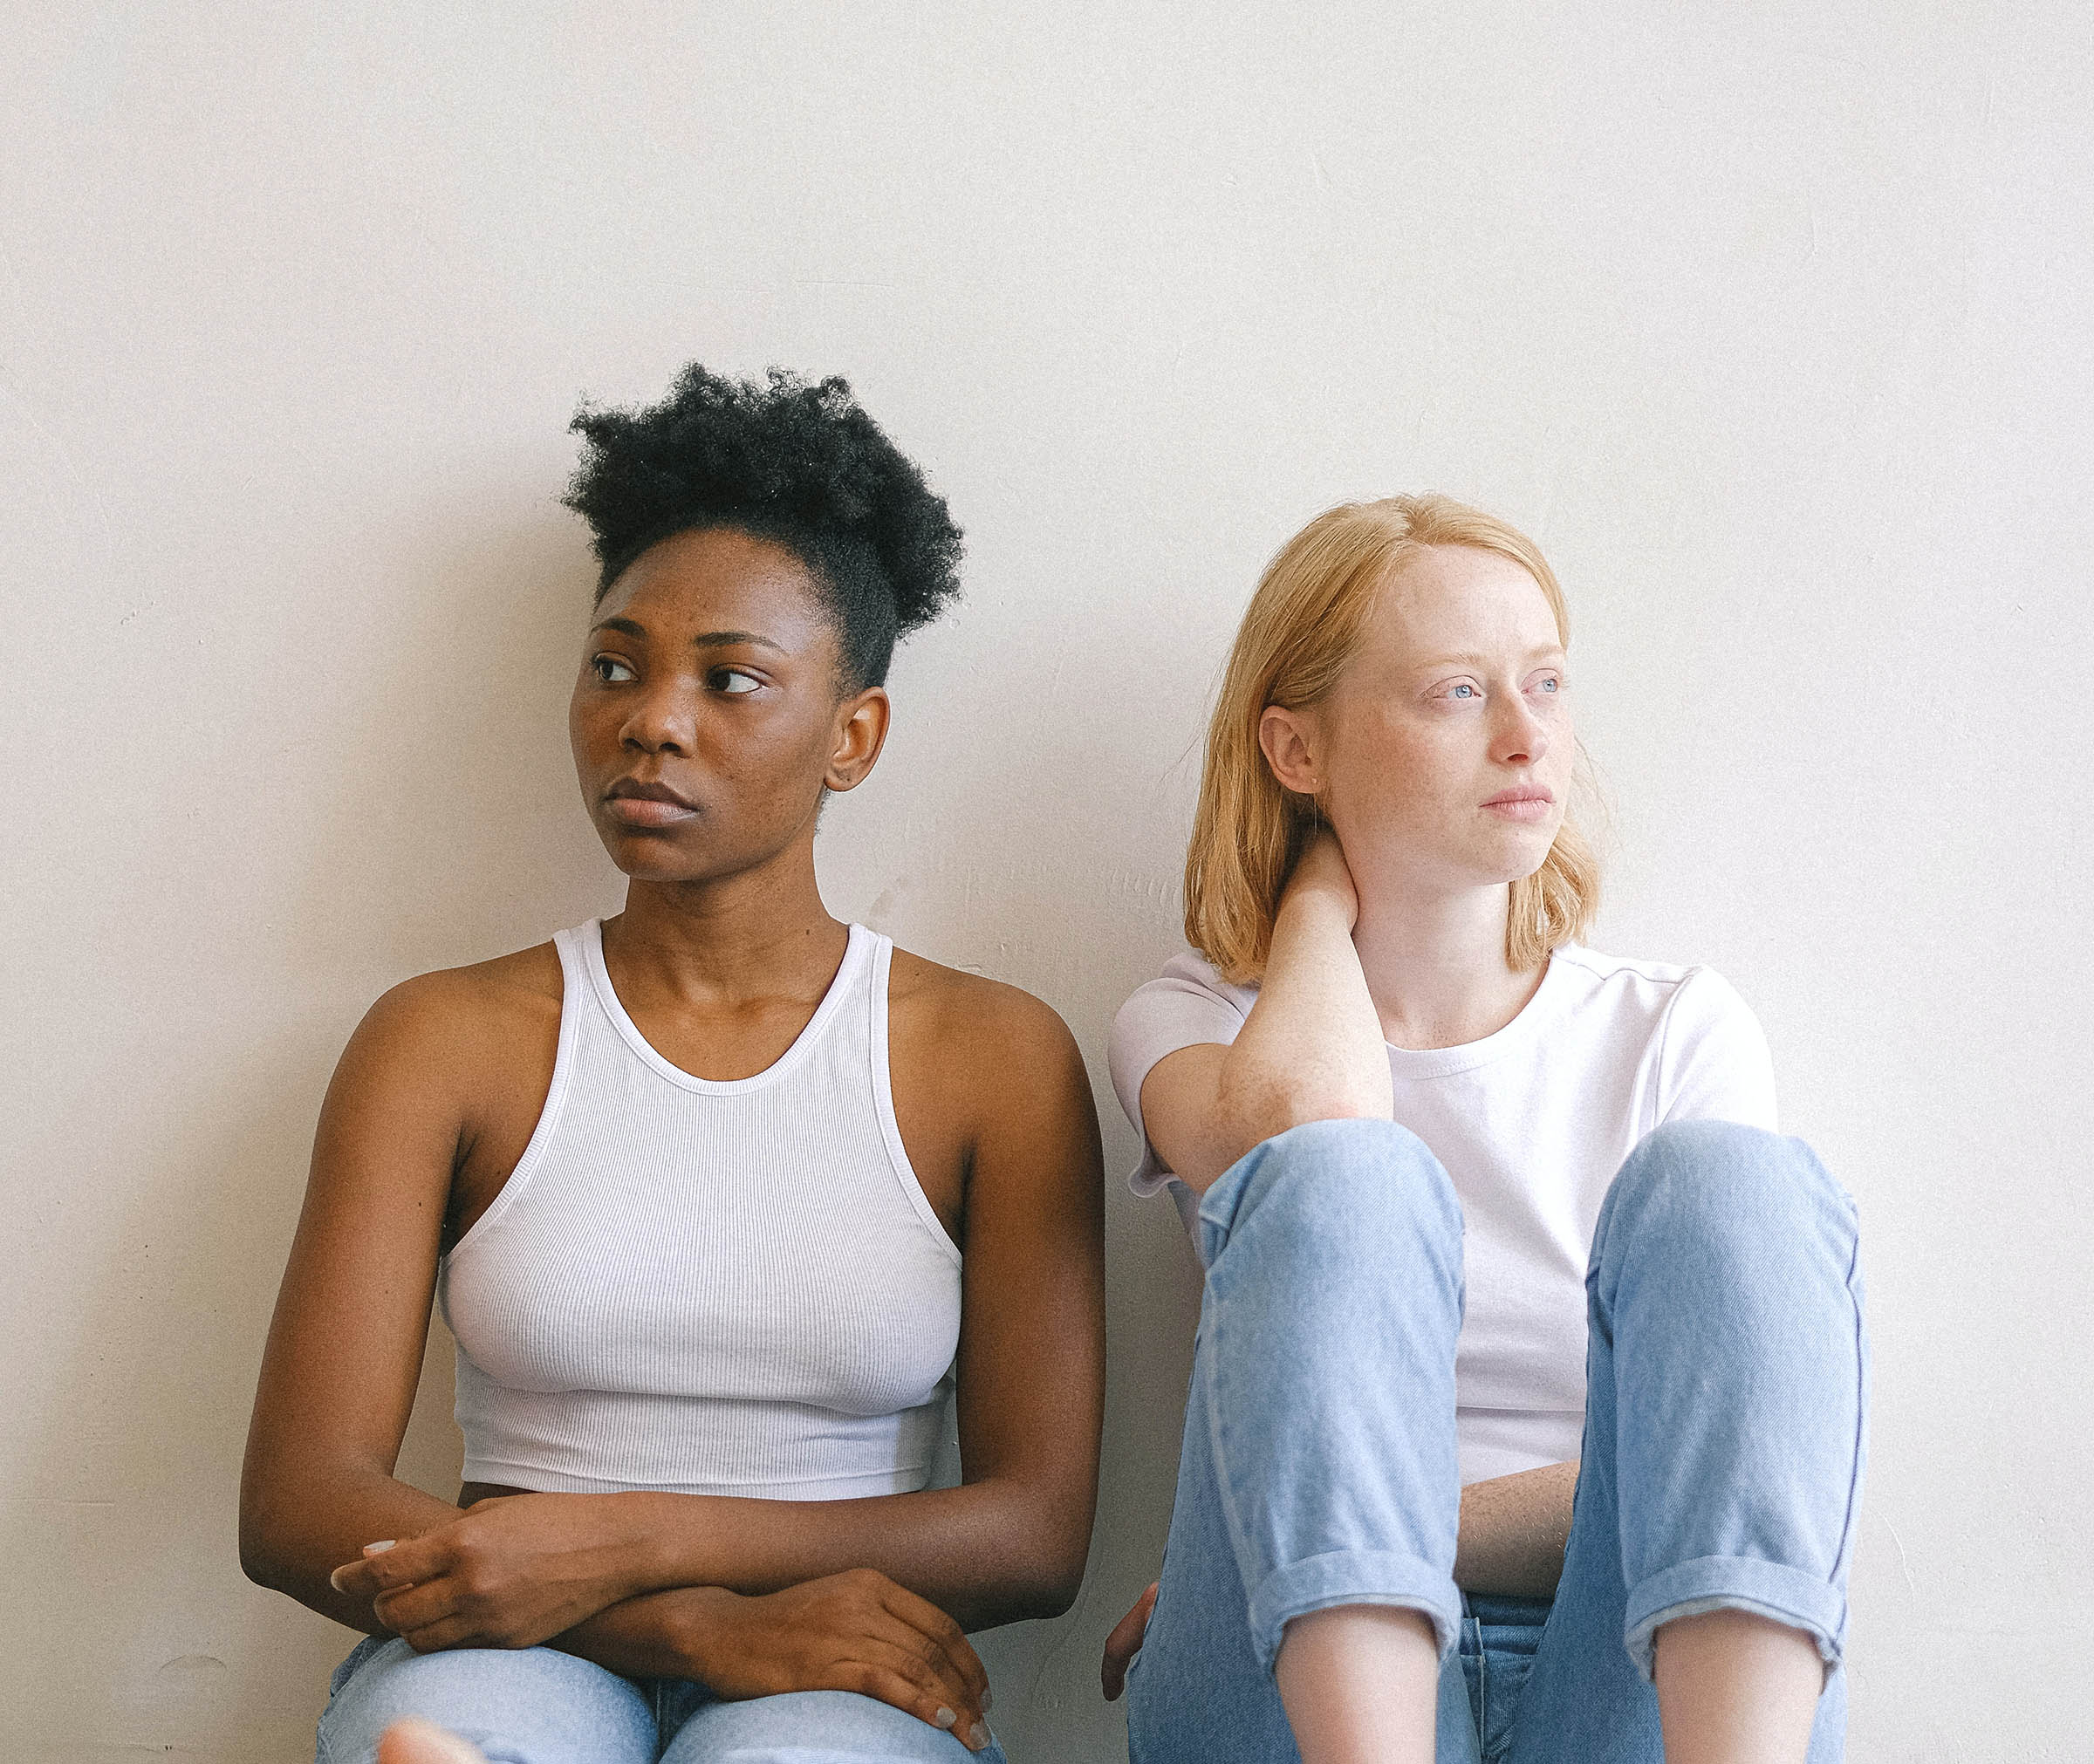 Two women sit against a wall, looking away from each other.